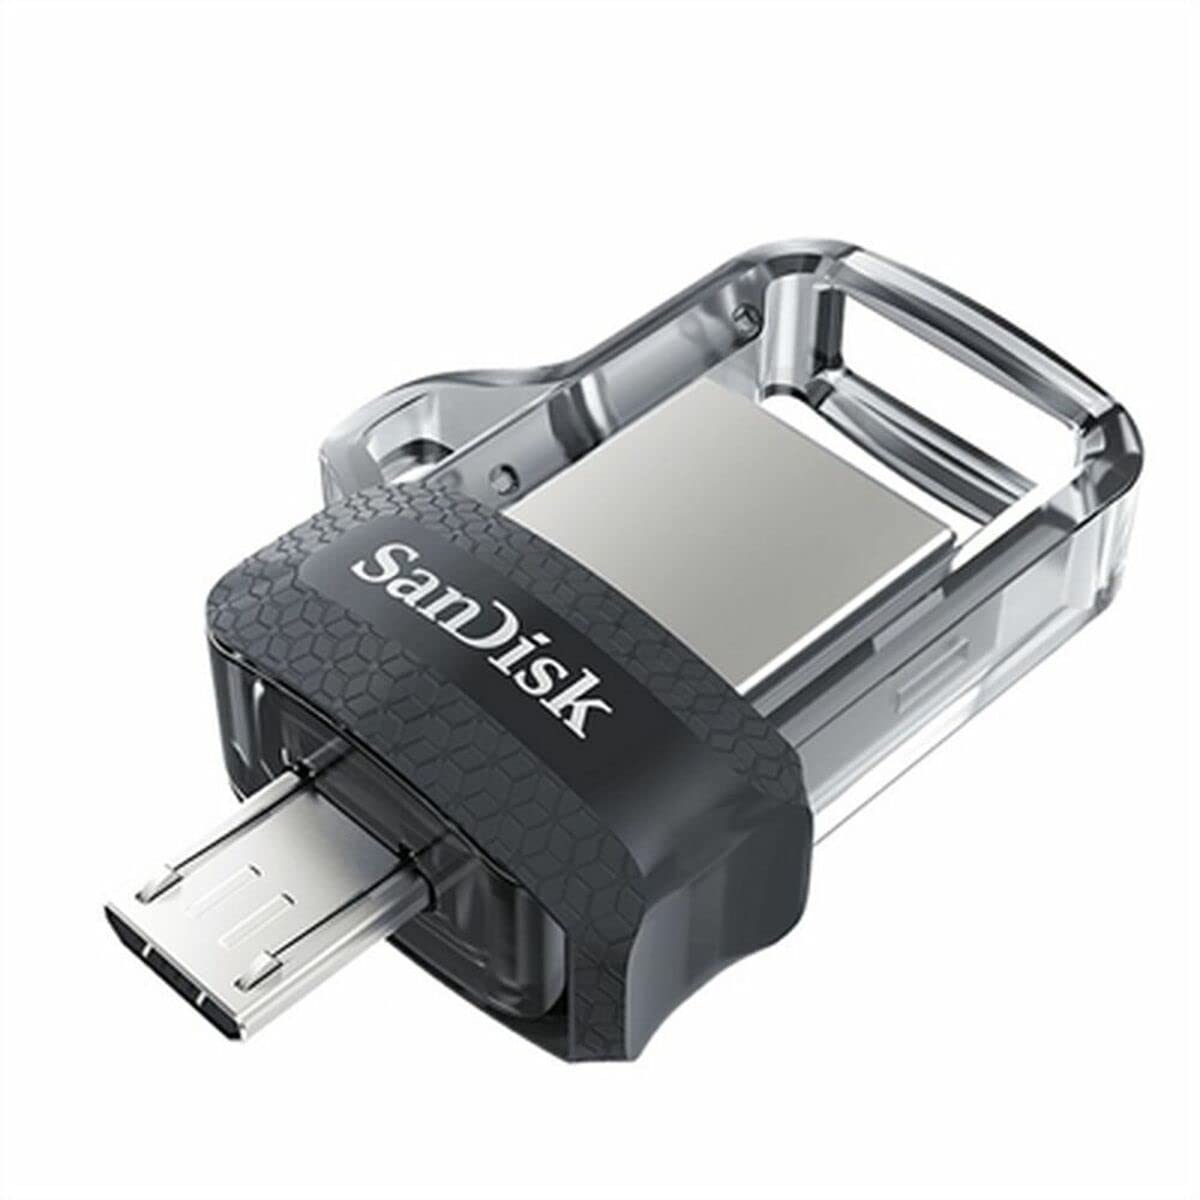 SanDisk 128GB Ultra Dual Drive m3.0 for Android Devices and Computers - microUSB, USB 3.0 - SDDD3-128G-G46, Black